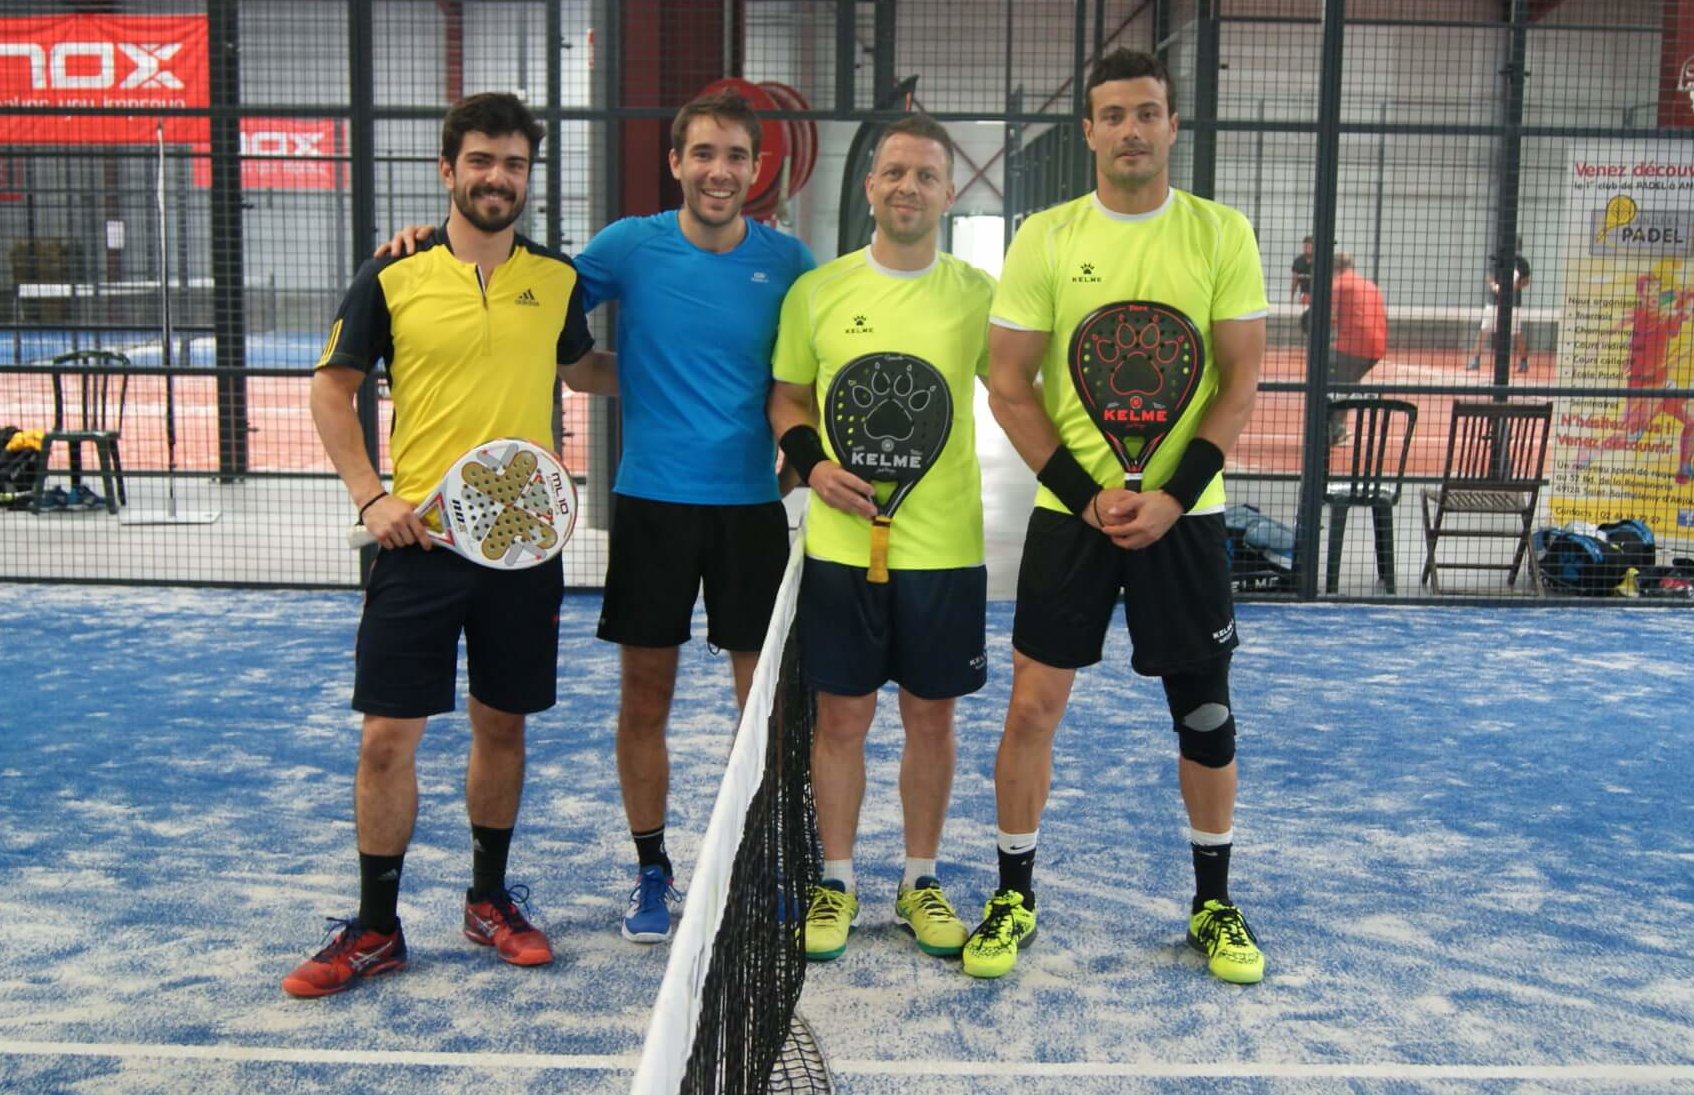 Maucourt / Boilevin at P500 d'Angers Padel